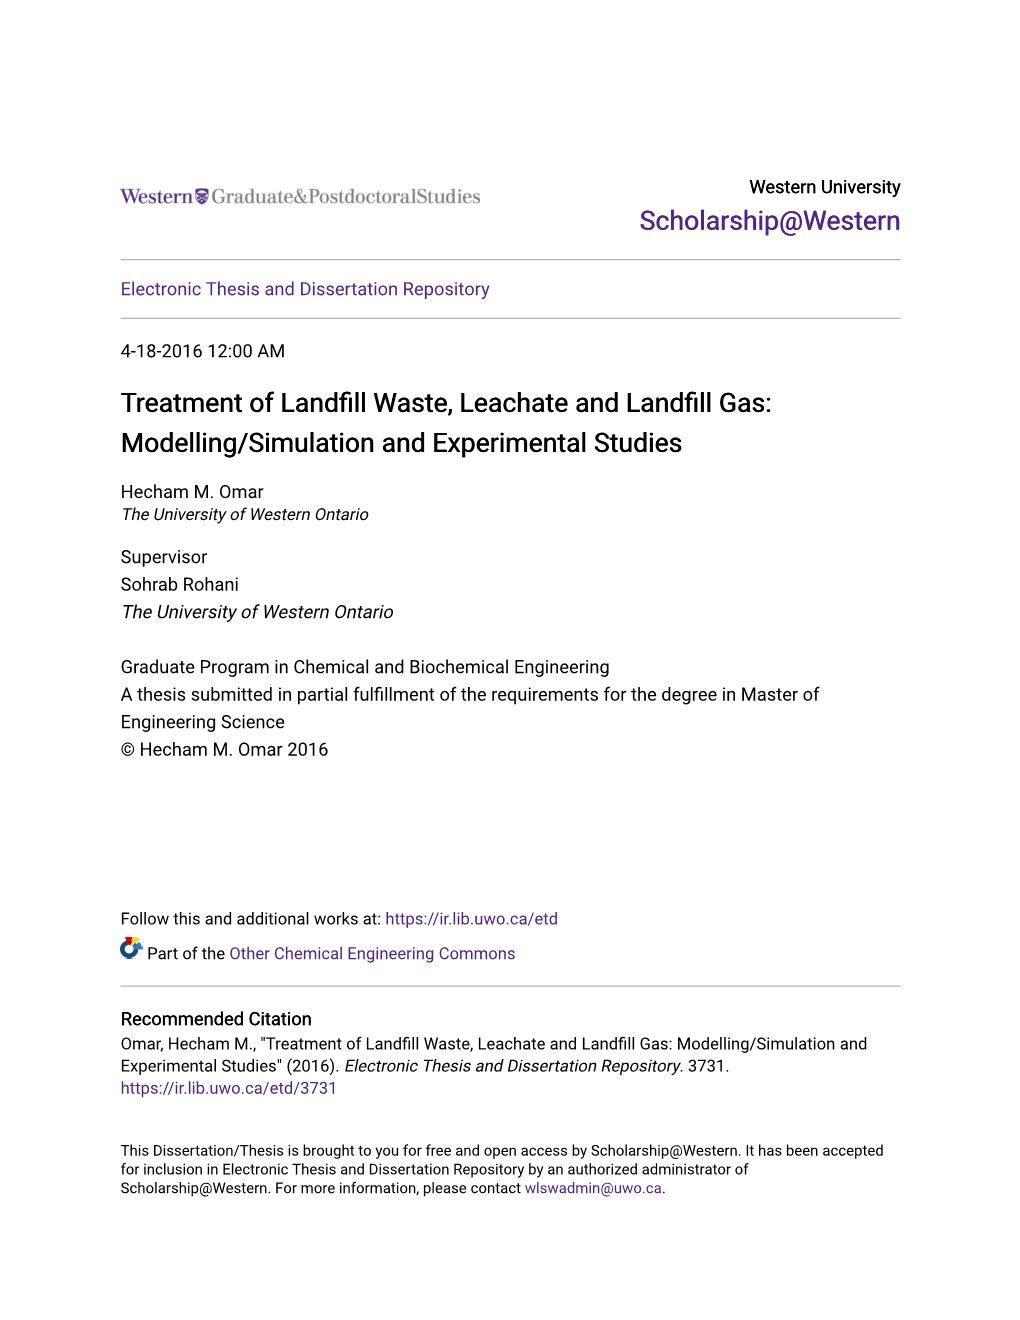 Treatment of Landfill Waste, Leachate and Landfill Gas: a Review Authors: Hecham Omar, Sohrab Rohani Article Status: Published in Front